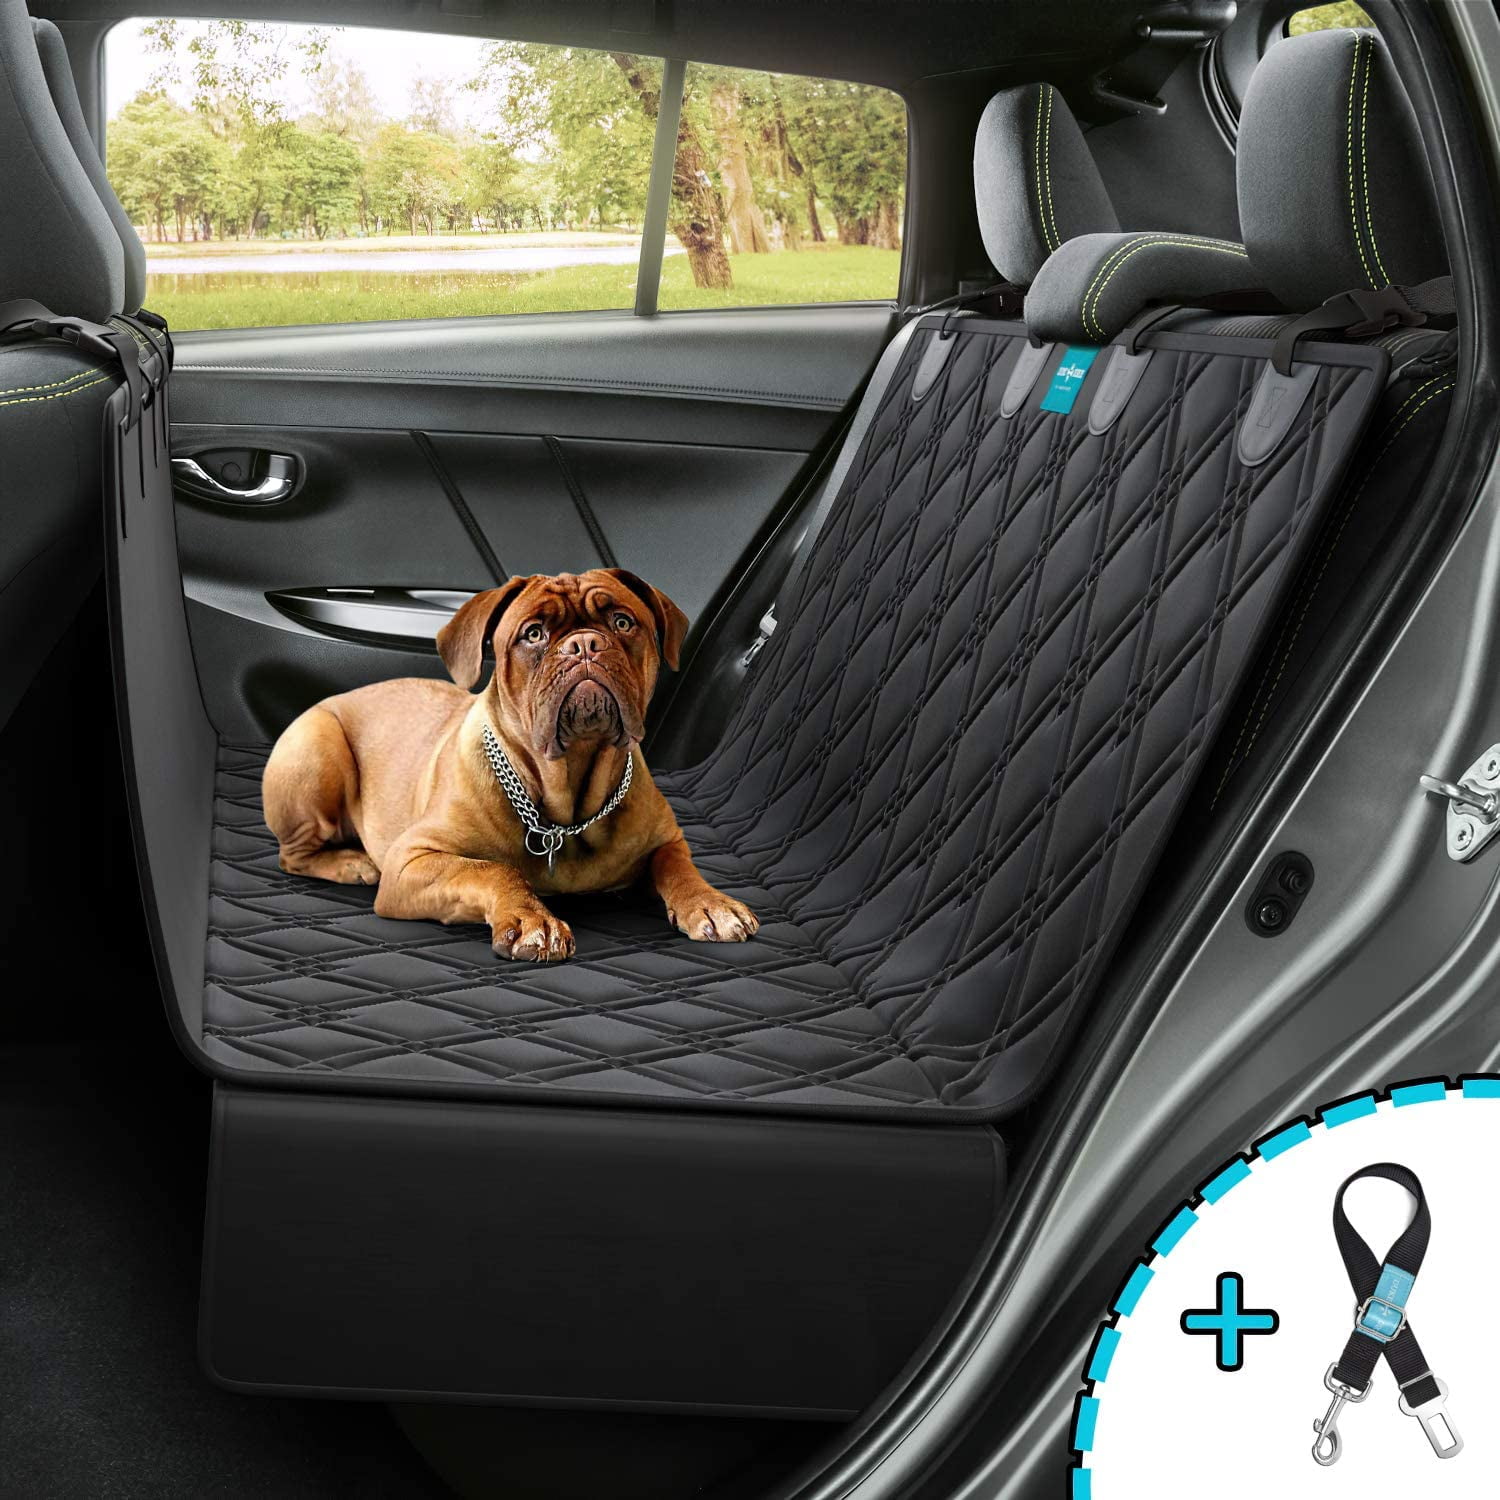 Dog Car Seat Cover BackSeat Cover Hammock Style 100 Waterproof Luxury